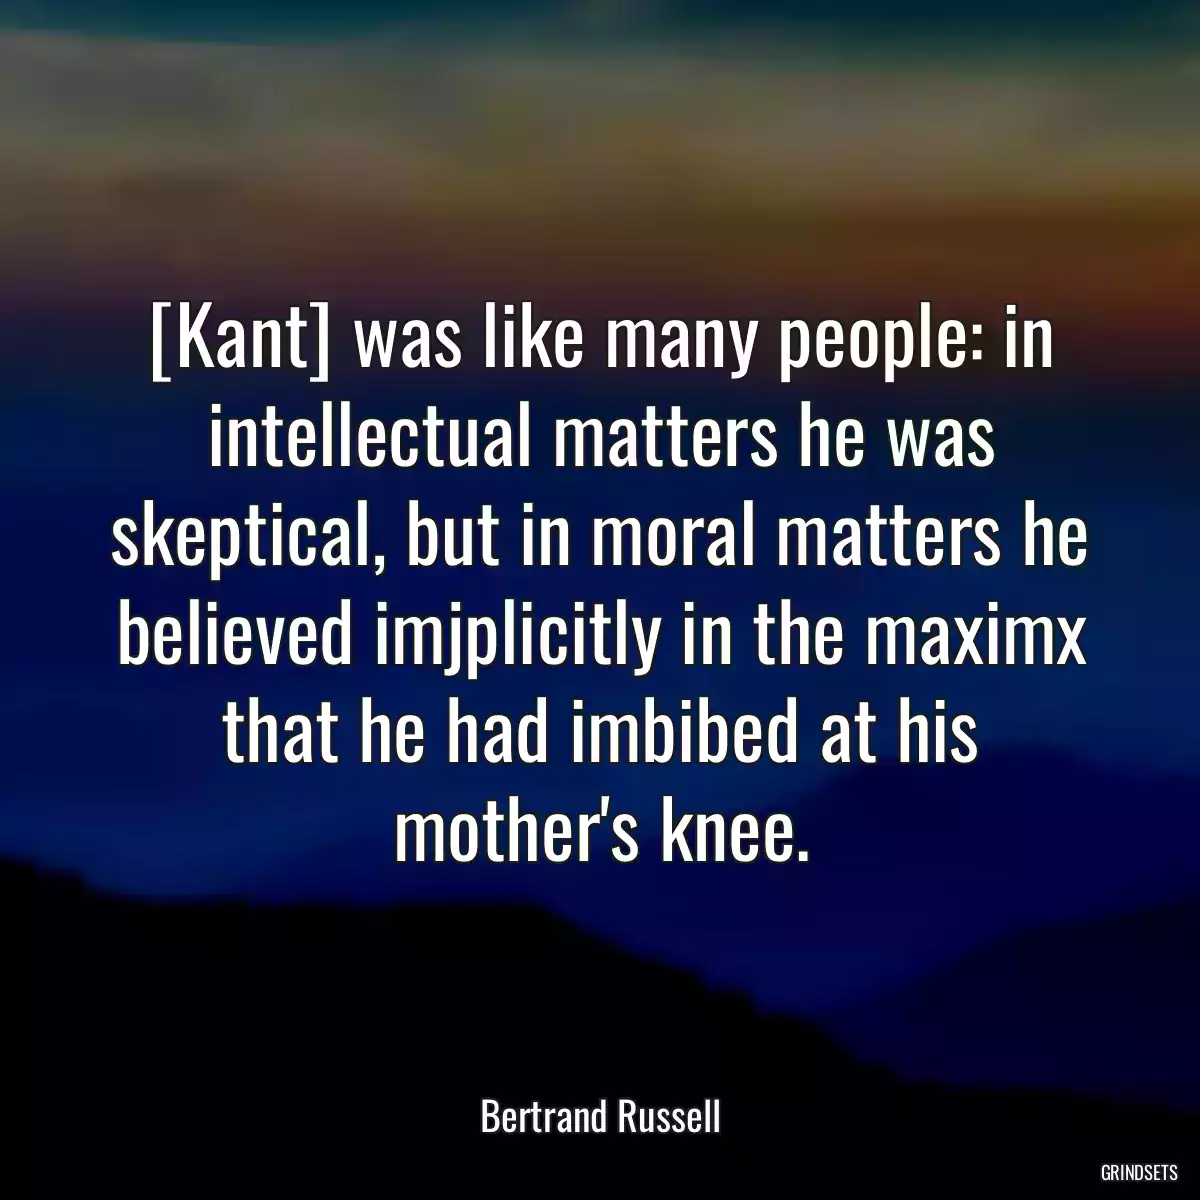 [Kant] was like many people: in intellectual matters he was skeptical, but in moral matters he believed imjplicitly in the maximx that he had imbibed at his mother\'s knee.